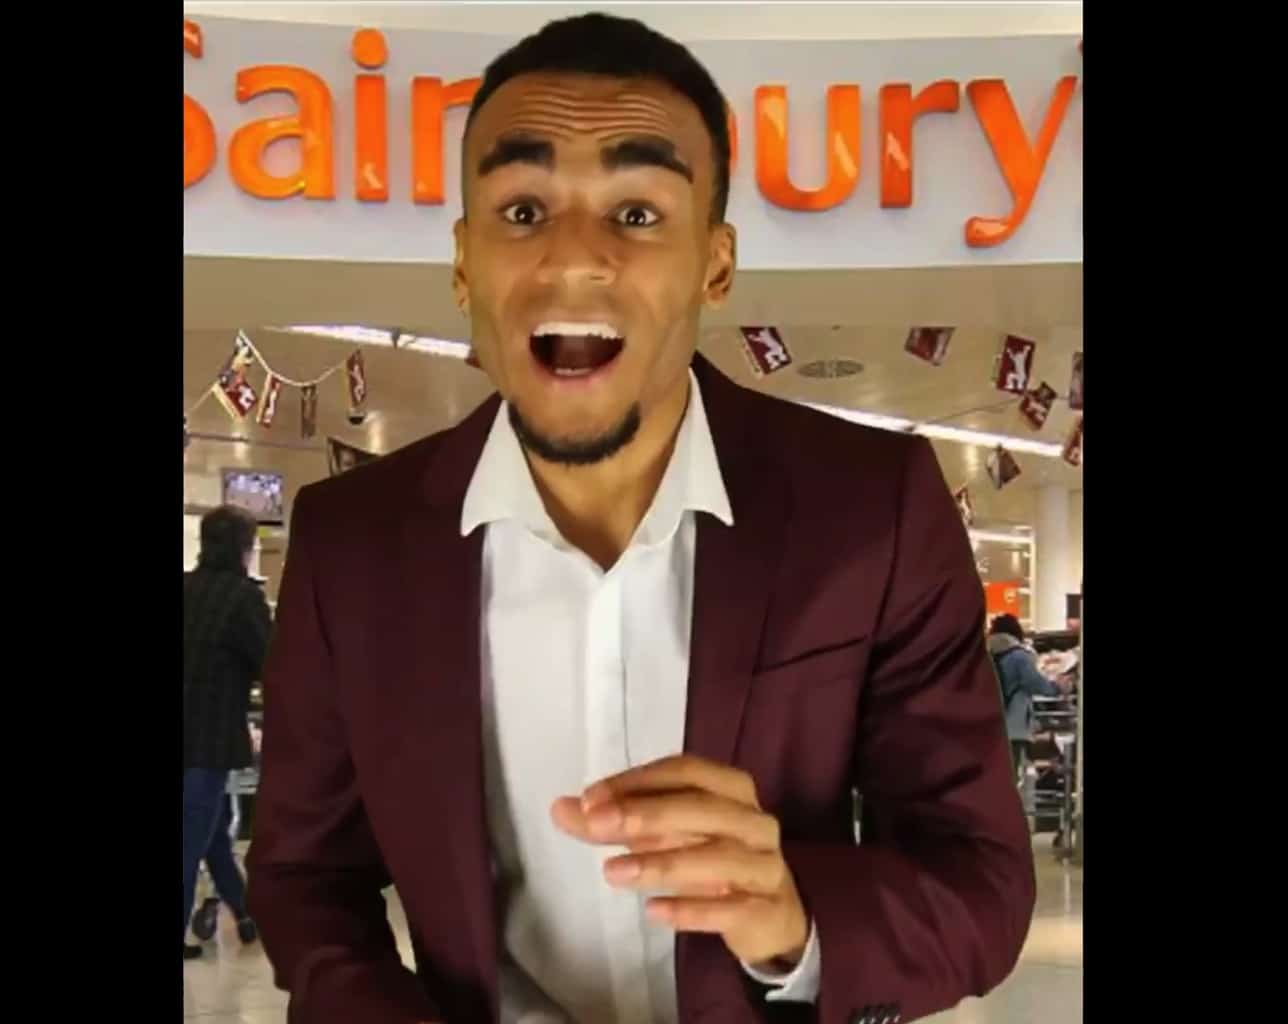 Comedian has perfect response to Sainsbury’s ad dissenters